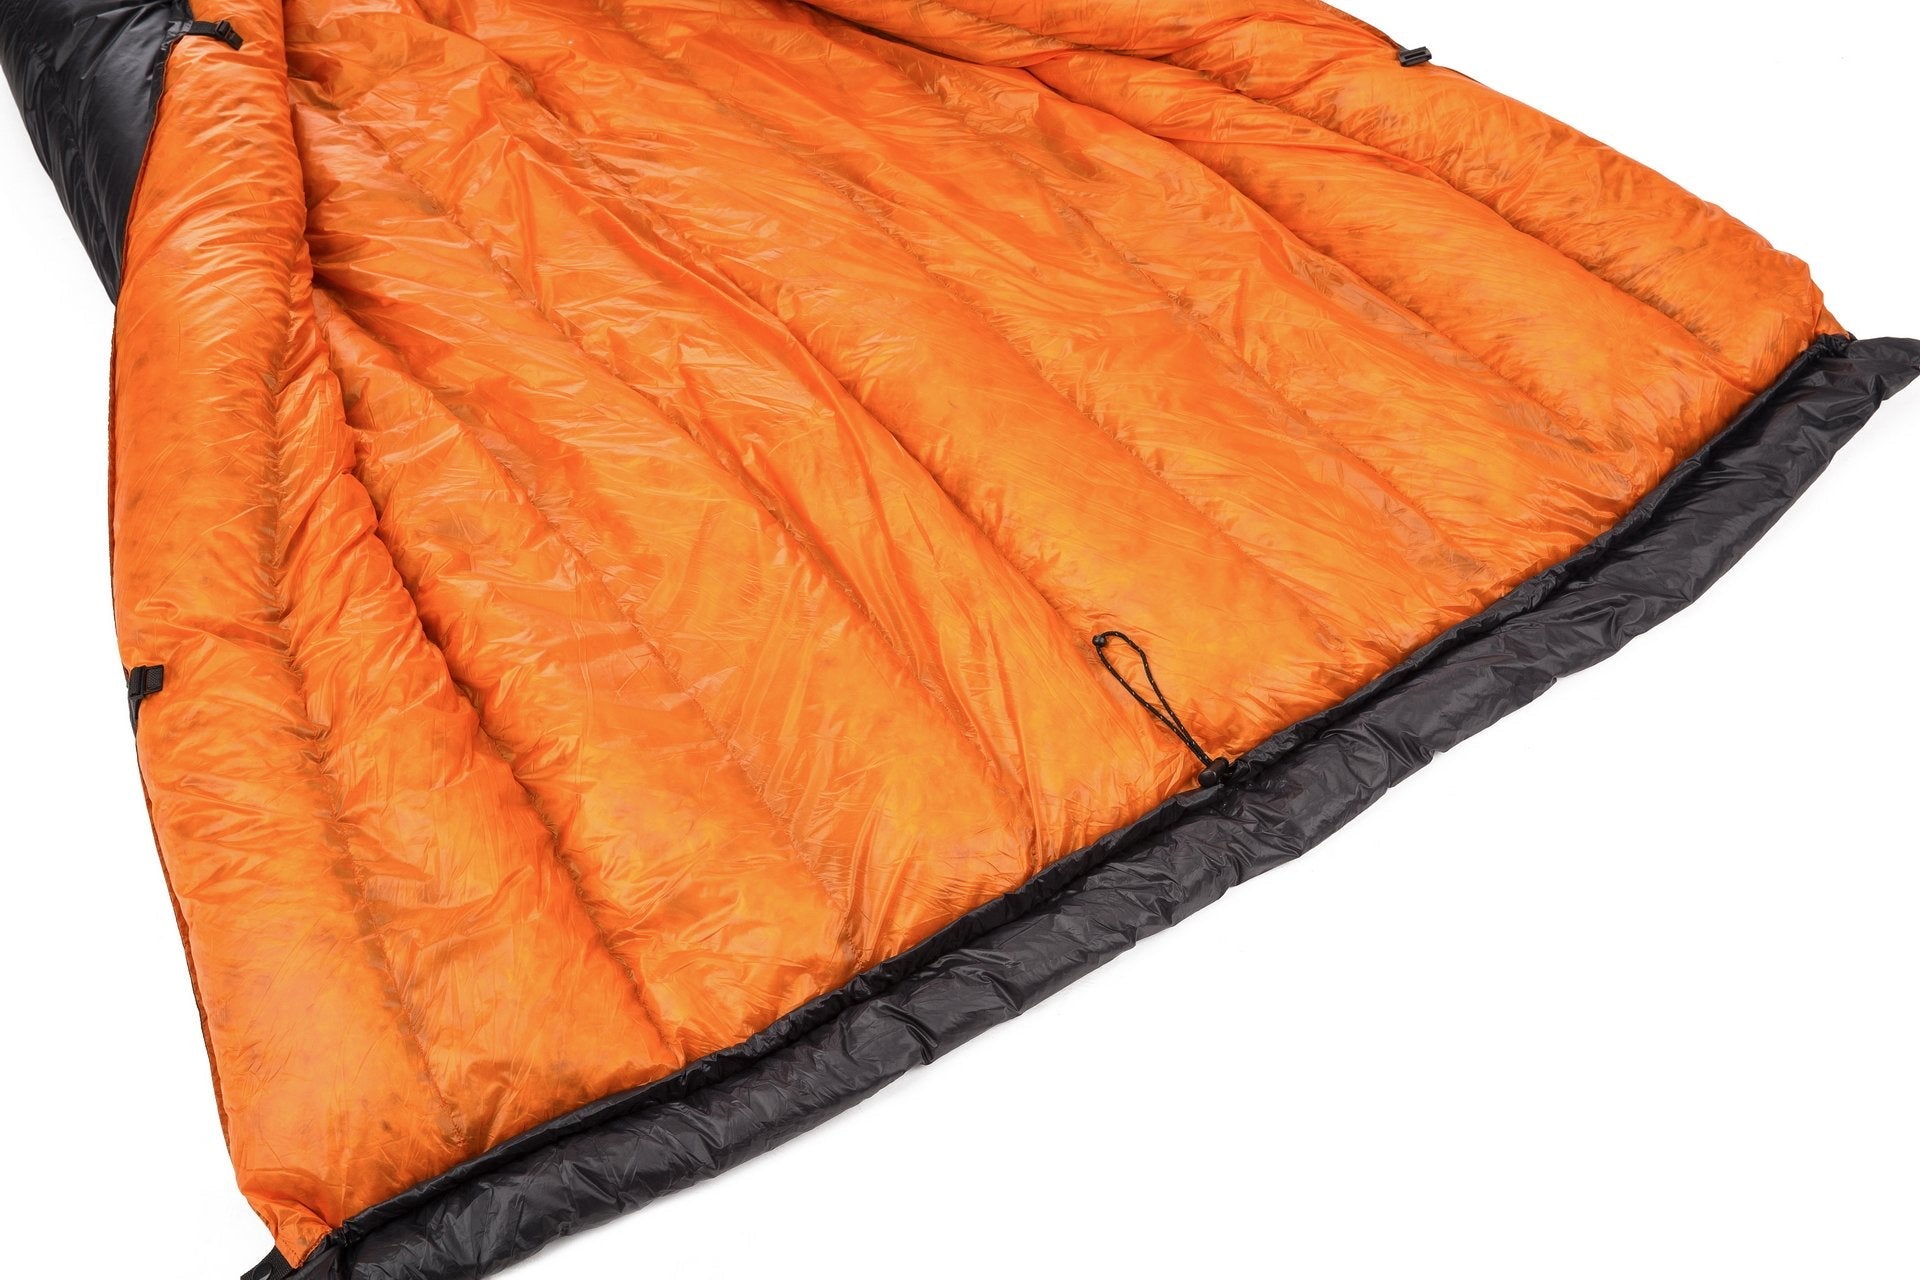 Featherstone | Camping Top Quilt Water Repellant Down Blanket- Moondance 25, Camping Quilt, Featherstone, Defiance Outdoor Gear Co.